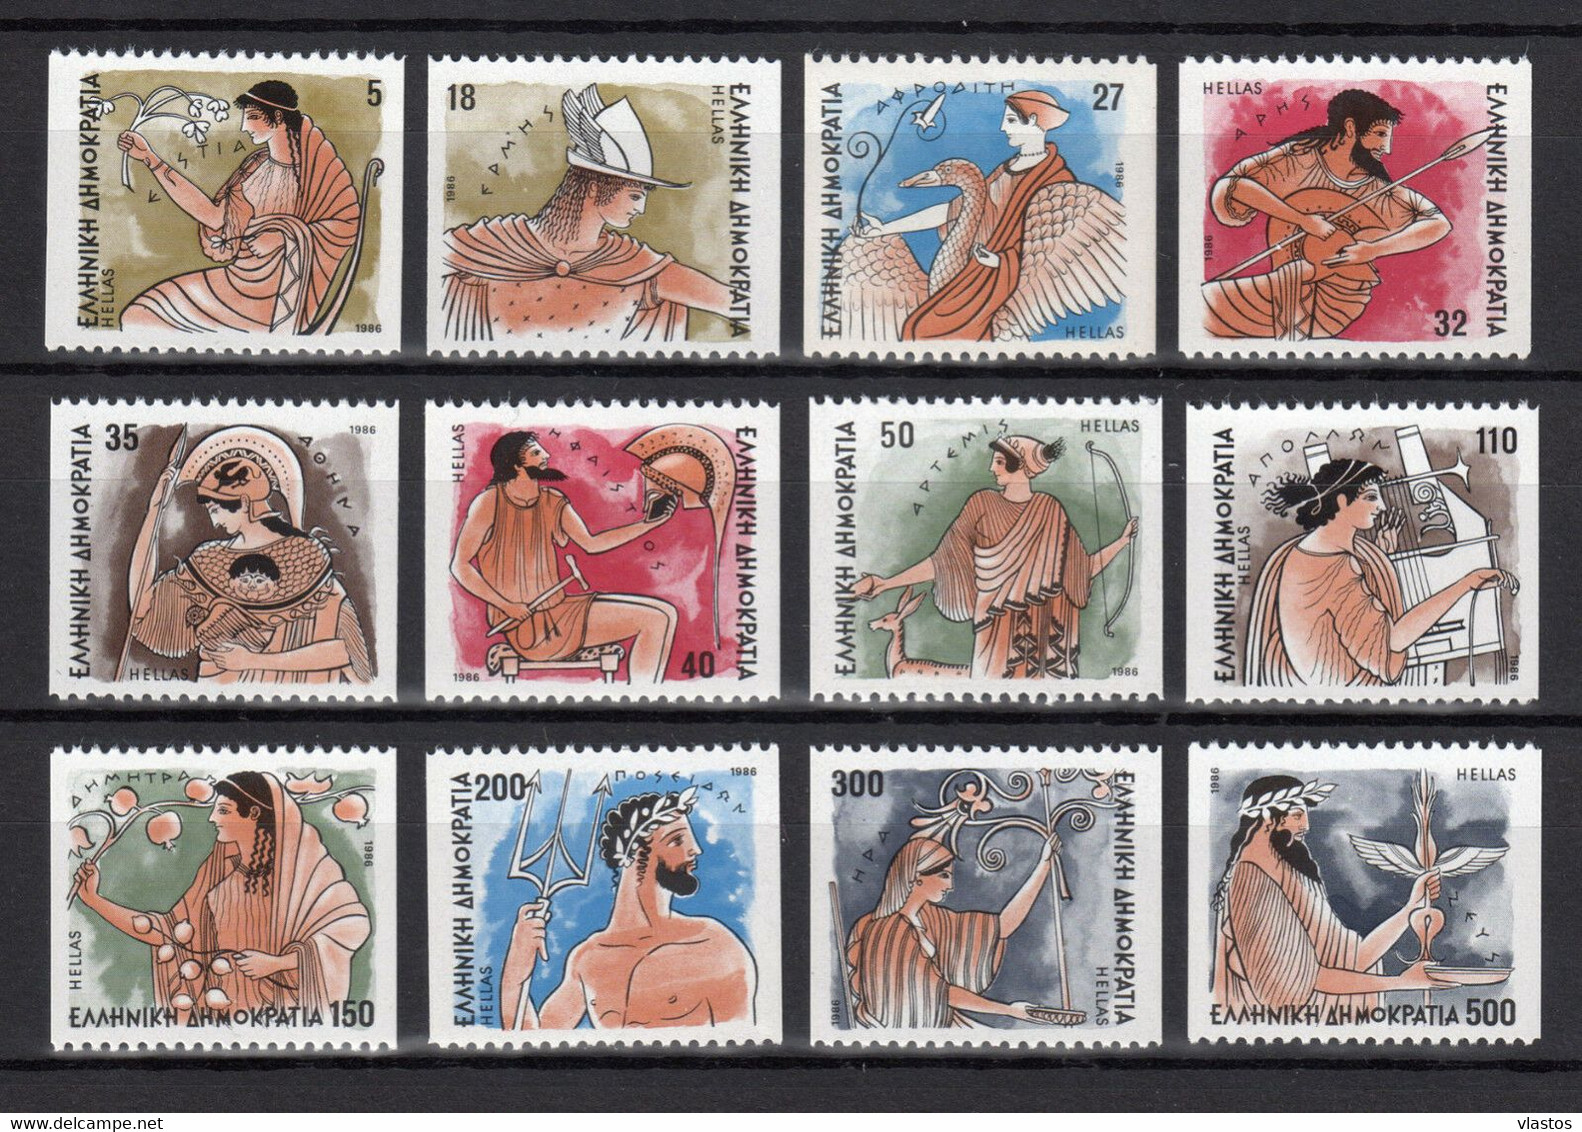 GREECE 1986 COMPLETE YEAR - PERFORATED+IMPERFORATED STAMPS MNH - Années Complètes